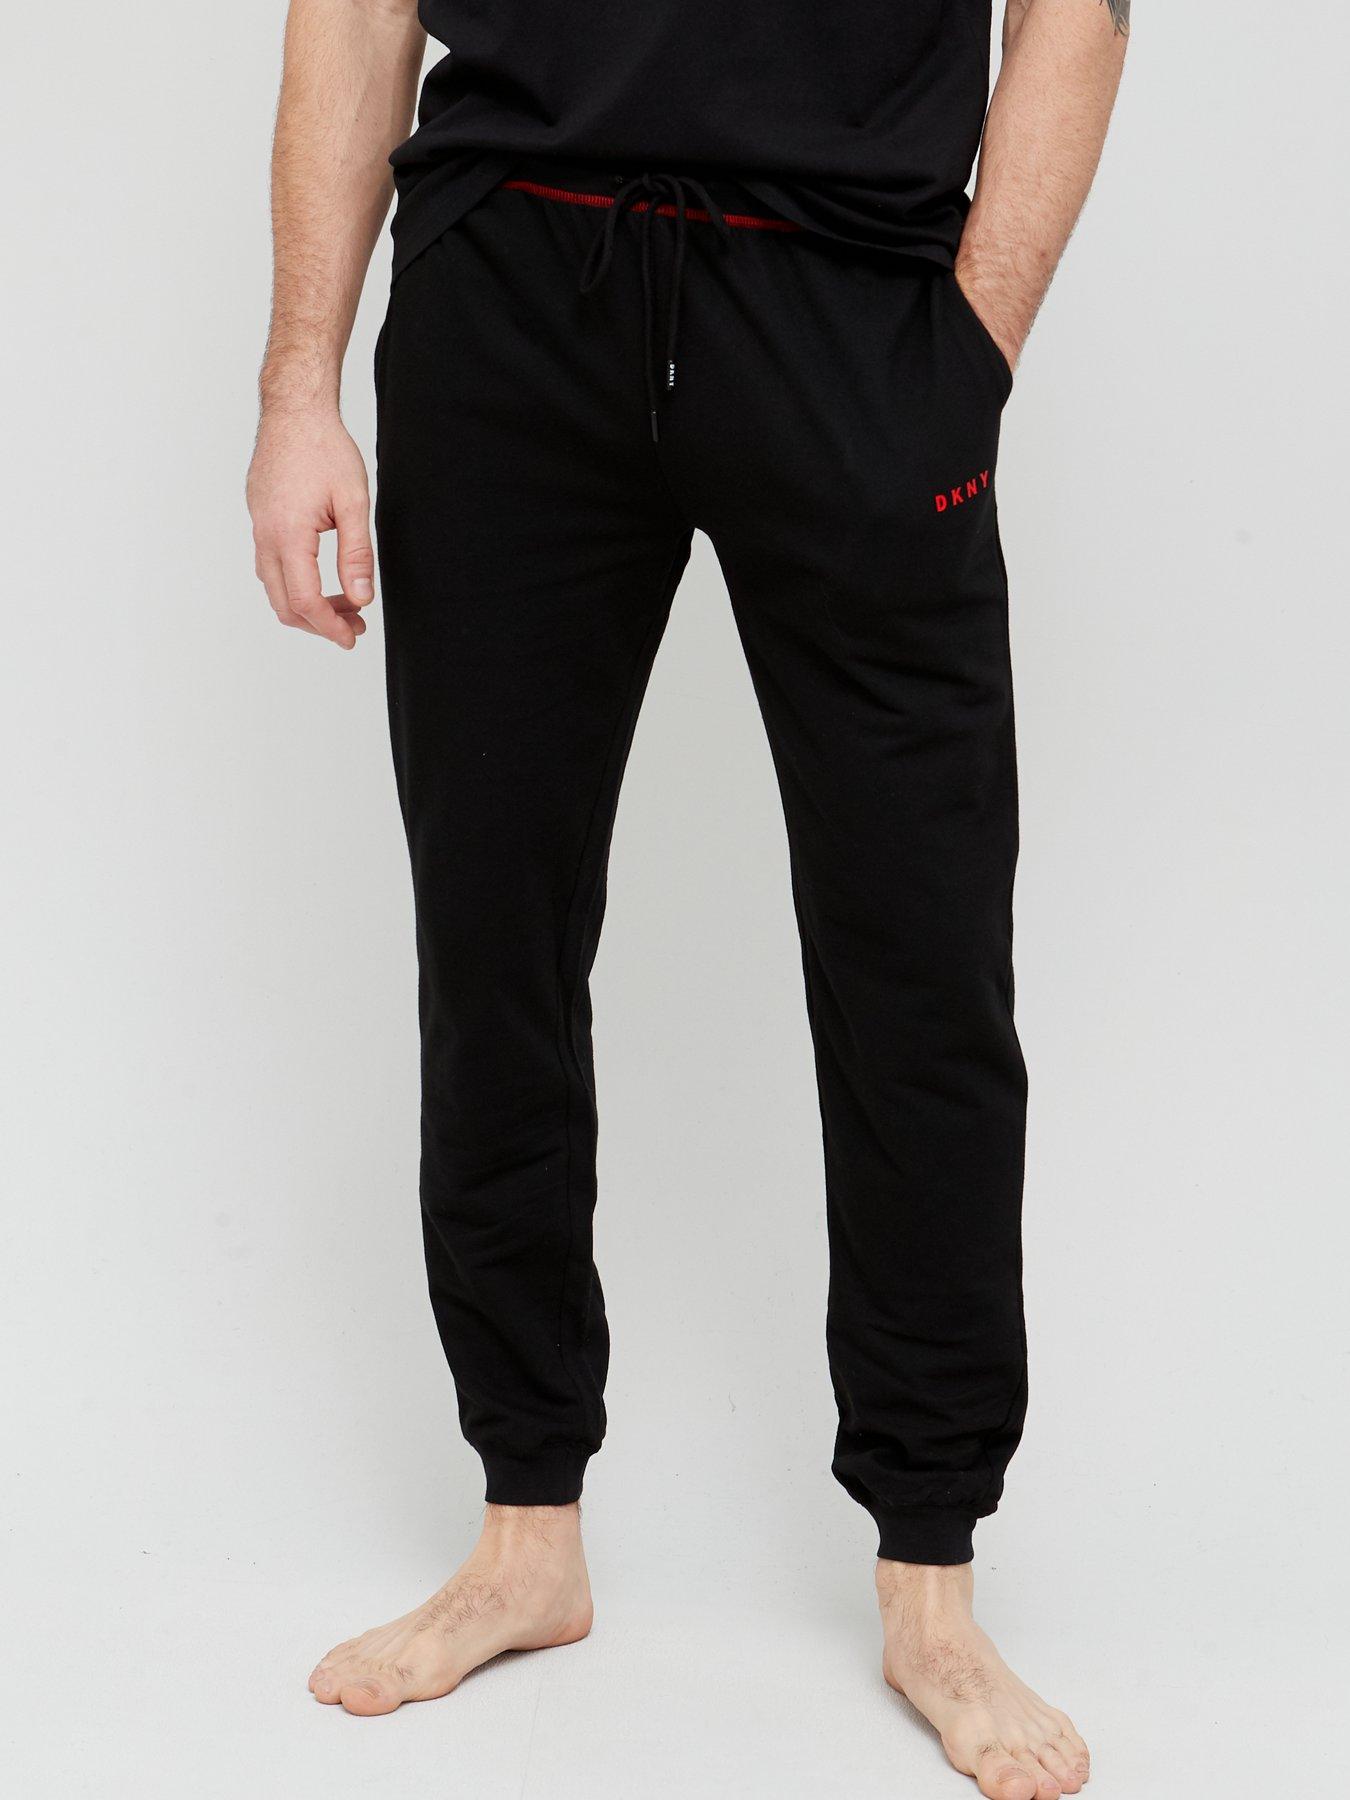  Acers Jersey Loungepant - Black